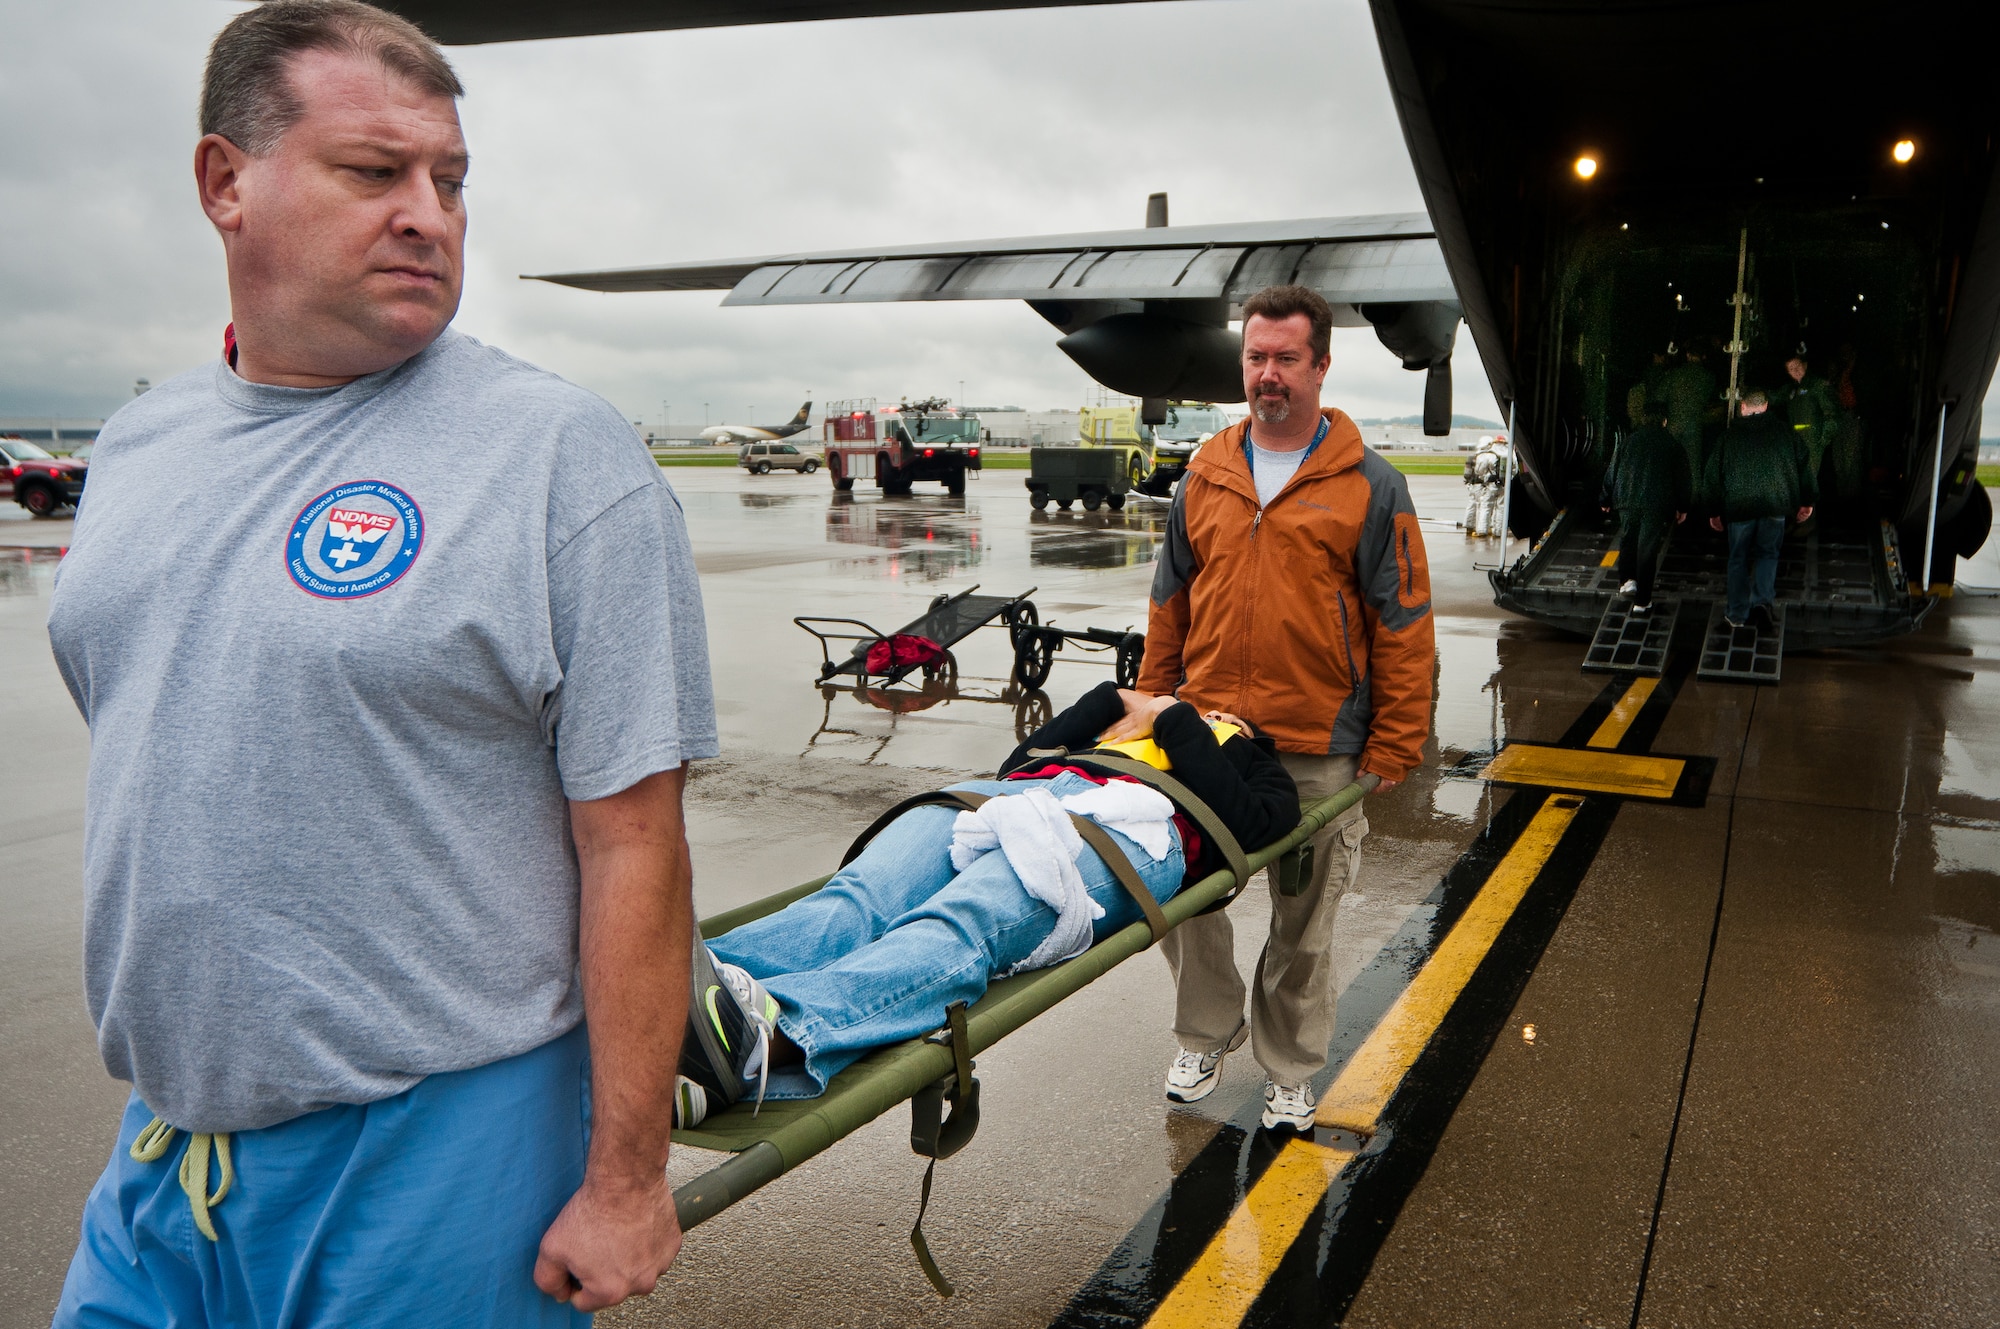 Paul Beard (left), a mental health professional at the Robley Rex Veterans Affairs Medical Center in Louisville, and Troy Colón, an assistive technology professional at the Louisville VA hospital, carry a simulated patient off a Kentucky Air National Guard C-130 during earthquake-response exercises held May 18, 2011, at the Kentucky Air National Guard Base in Louisville, Ky. The exercises were designed to test the capabilities of government agencies following a major earthquake along the New Madrid fault line. (U.S. Air Force photo by Maj. Dale Greer)